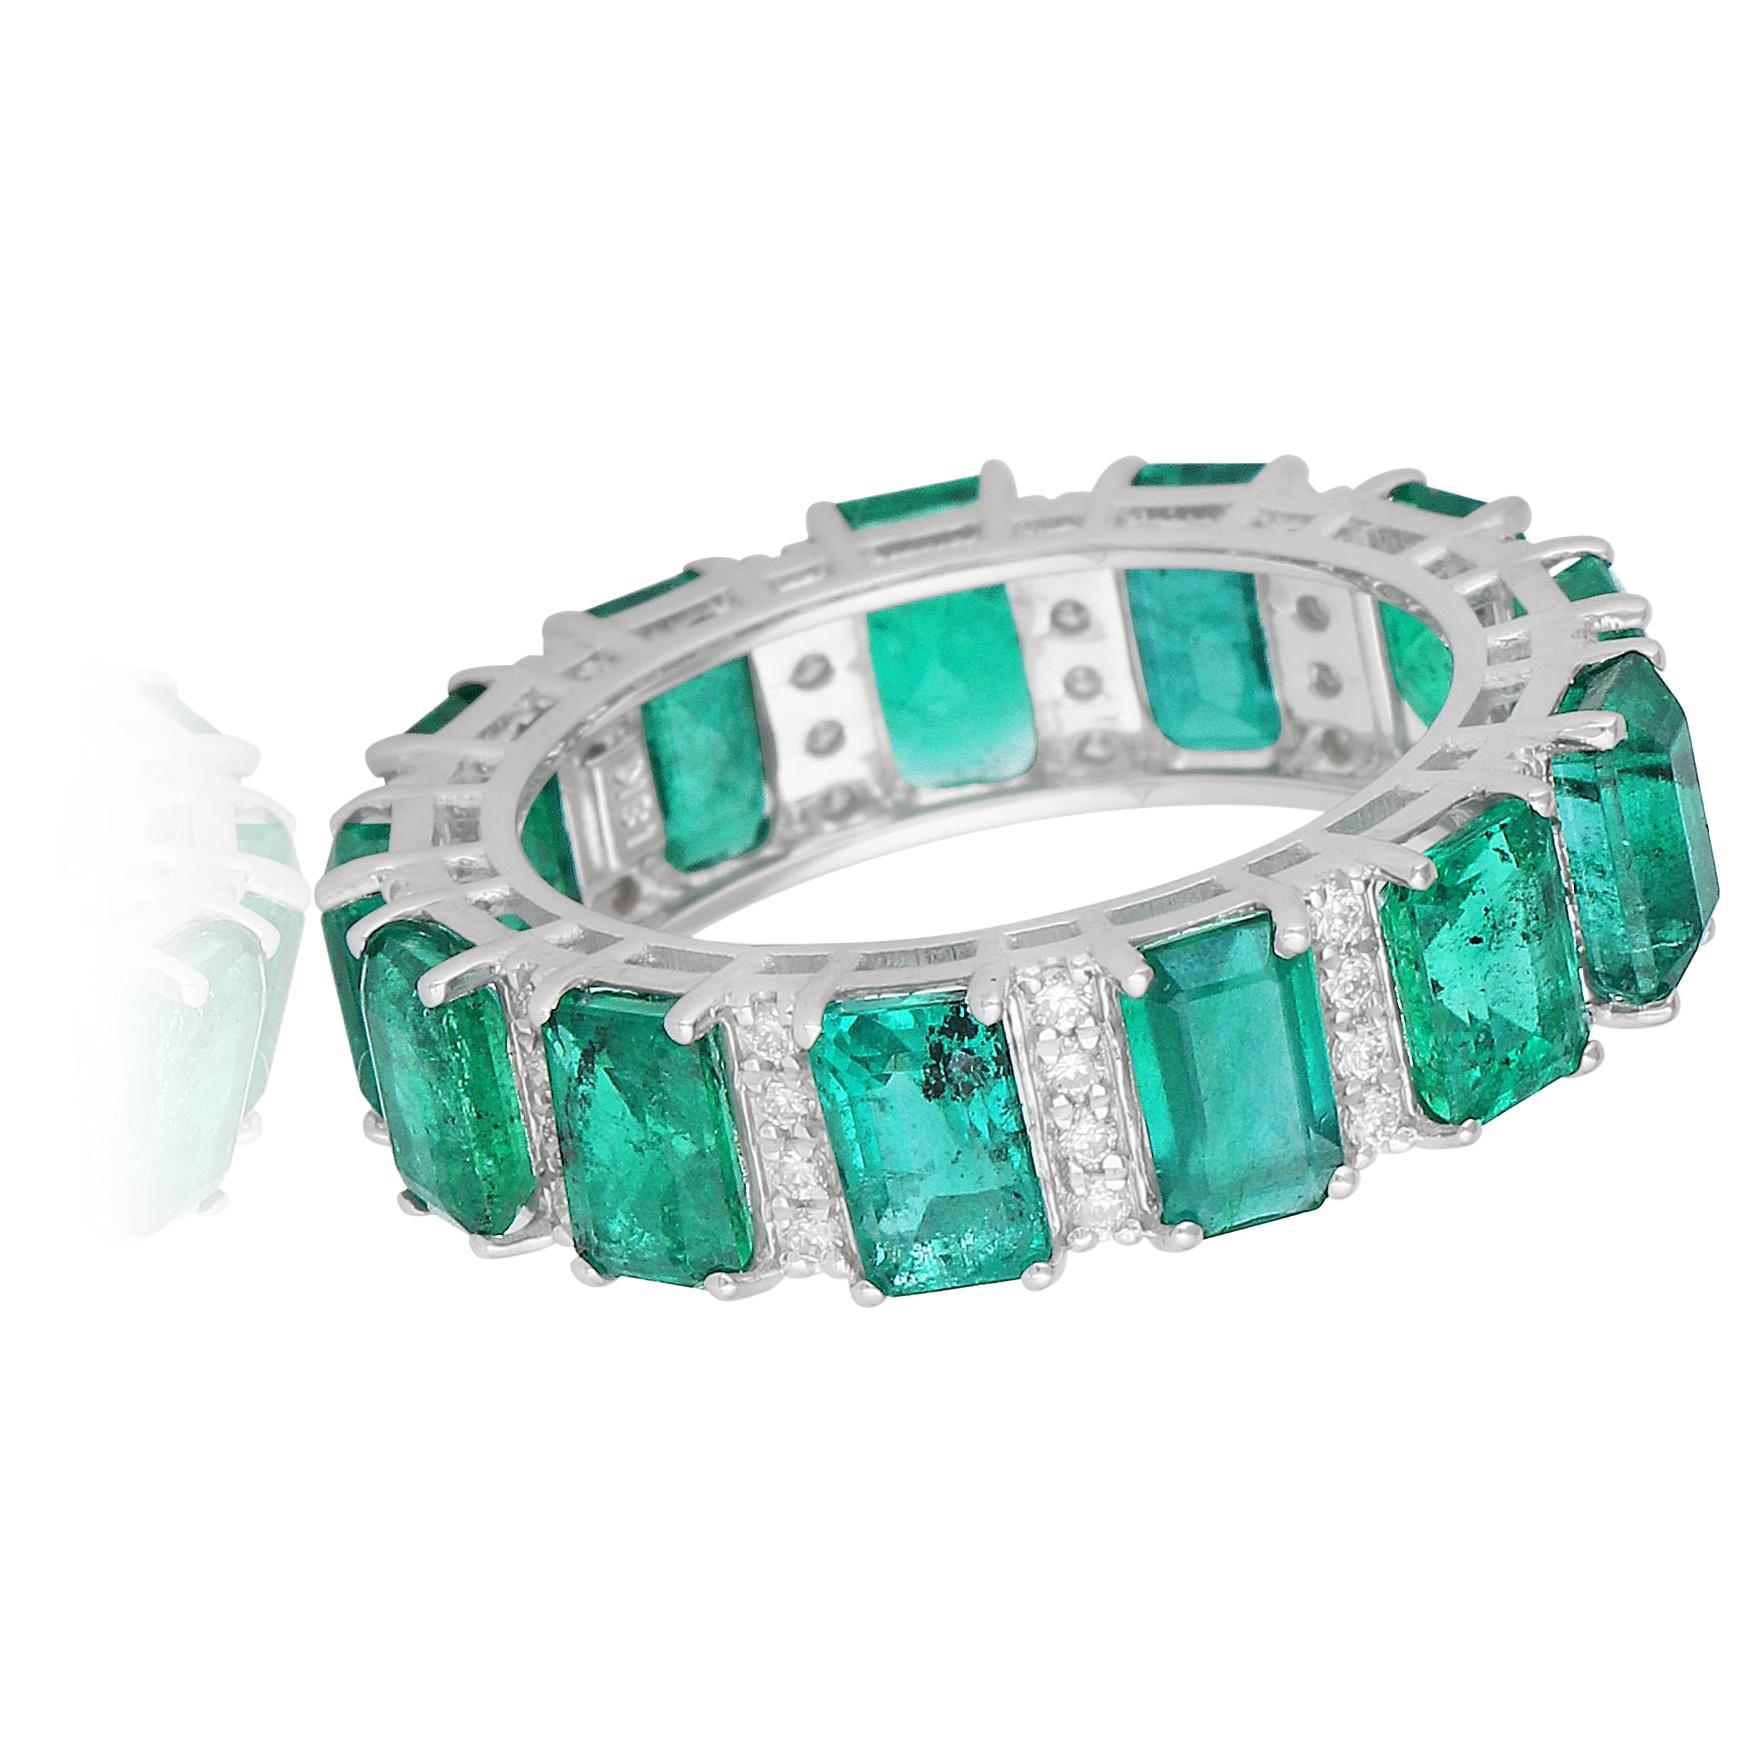 Adorn your finger with the exquisite beauty of this Zambian emerald gemstone band ring, embellished with diamond pavé and set in 18-karat white gold. Handcrafted to perfection, this ring is a stunning example of fine jewelry that seamlessly combines